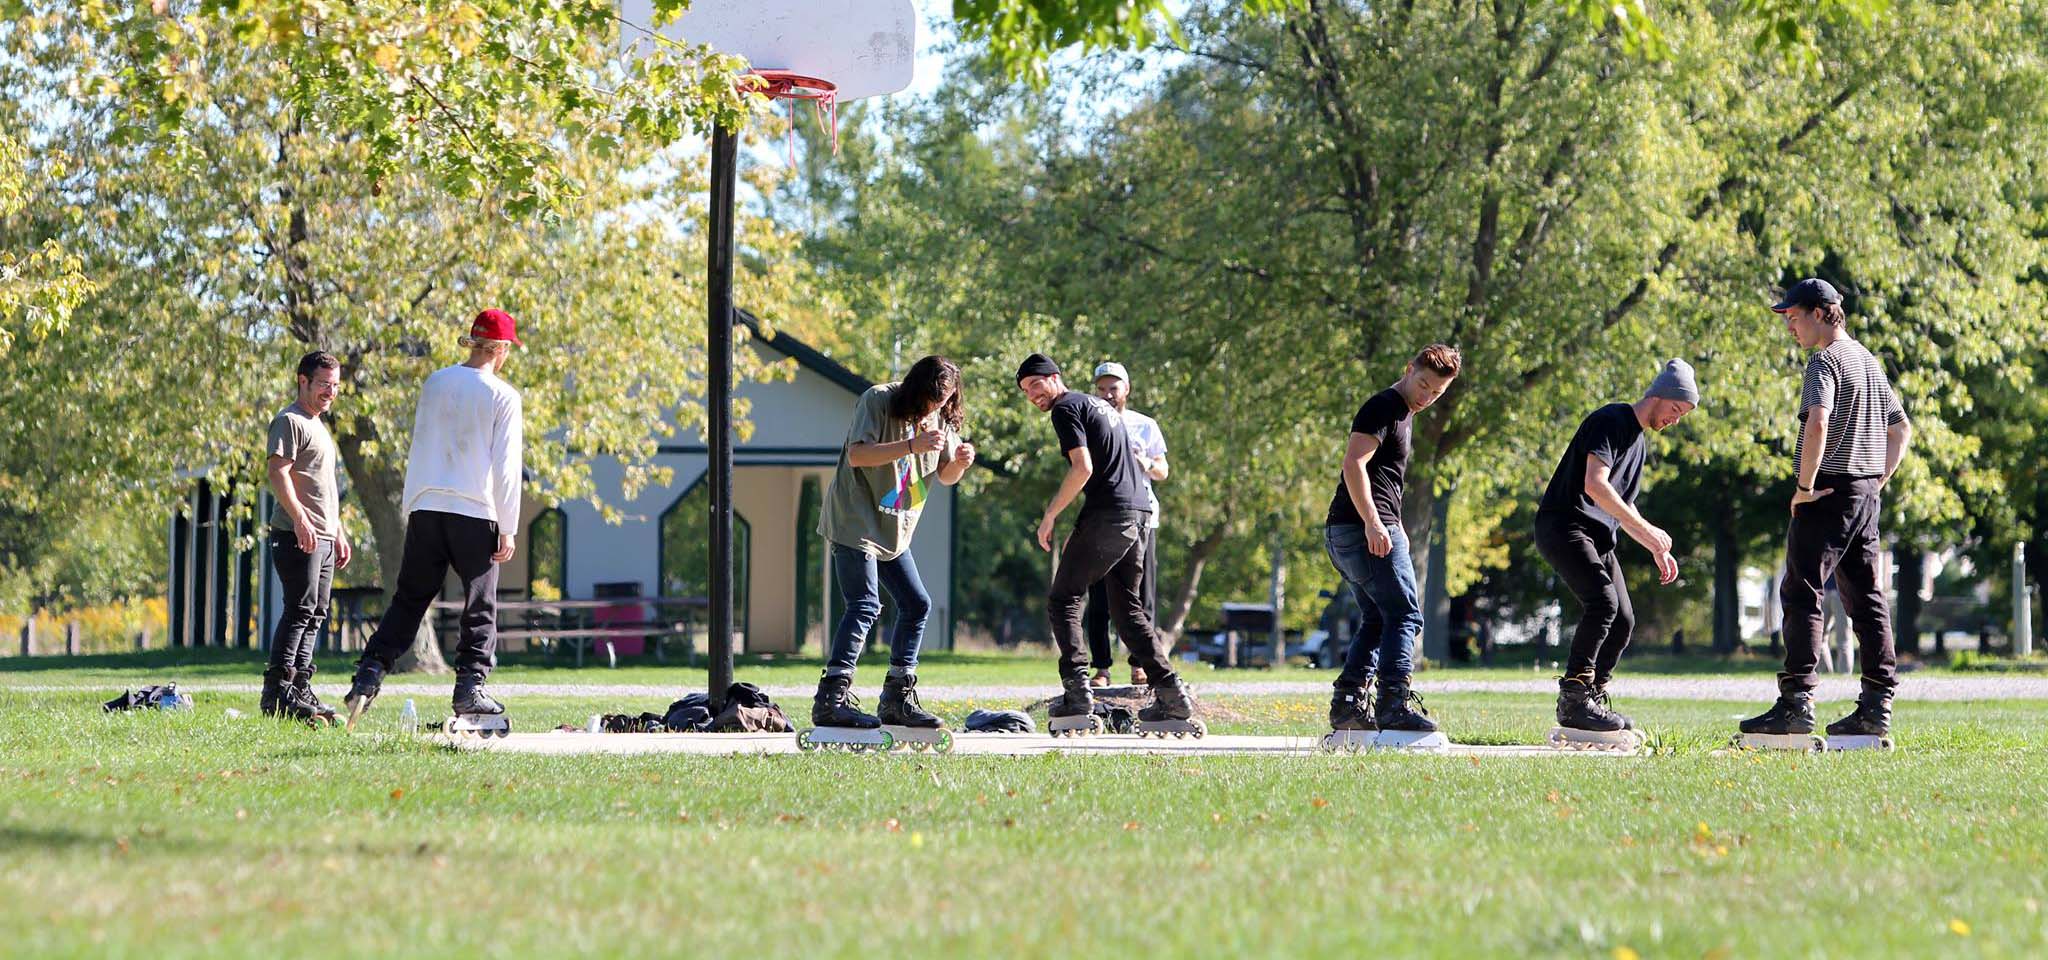 Group of people inline skating on a basketball court.